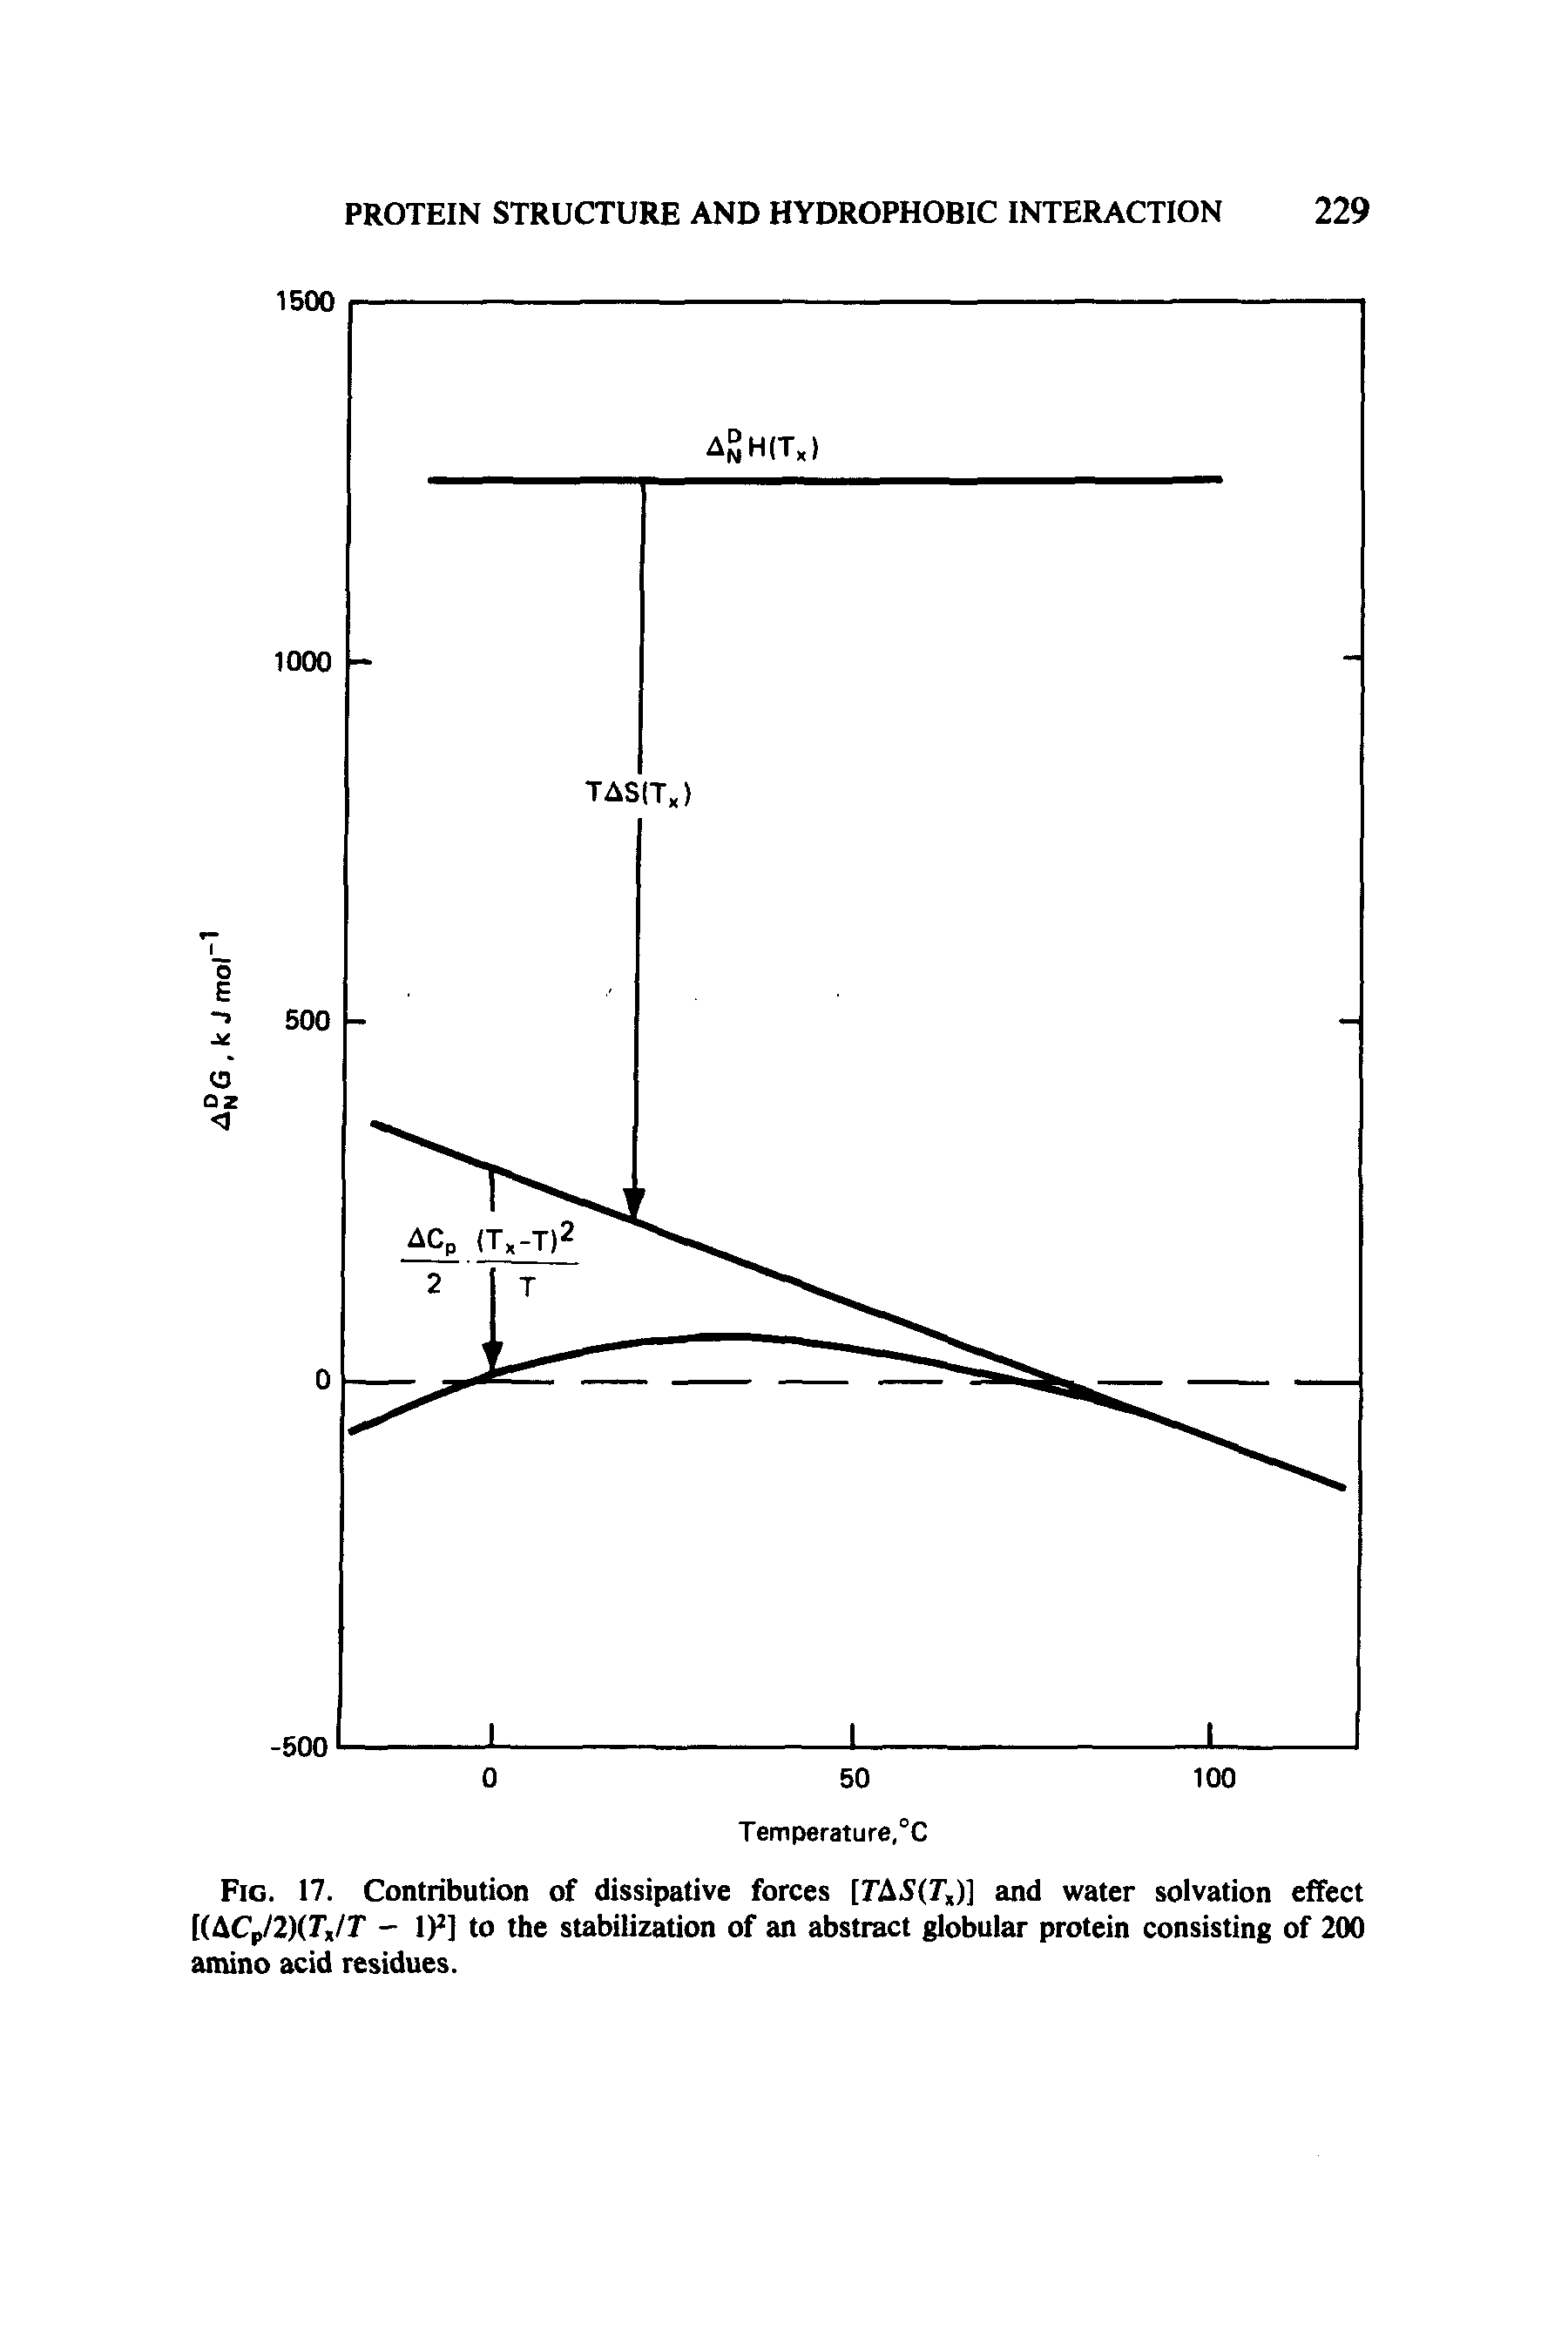 Fig. 17. Contribution of dissipative forces [TAS(T,)] and water solvation effect [(ACp/2)(r /r - l)2] to the stabilization of an abstract globular protein consisting of 200 amino acid residues.